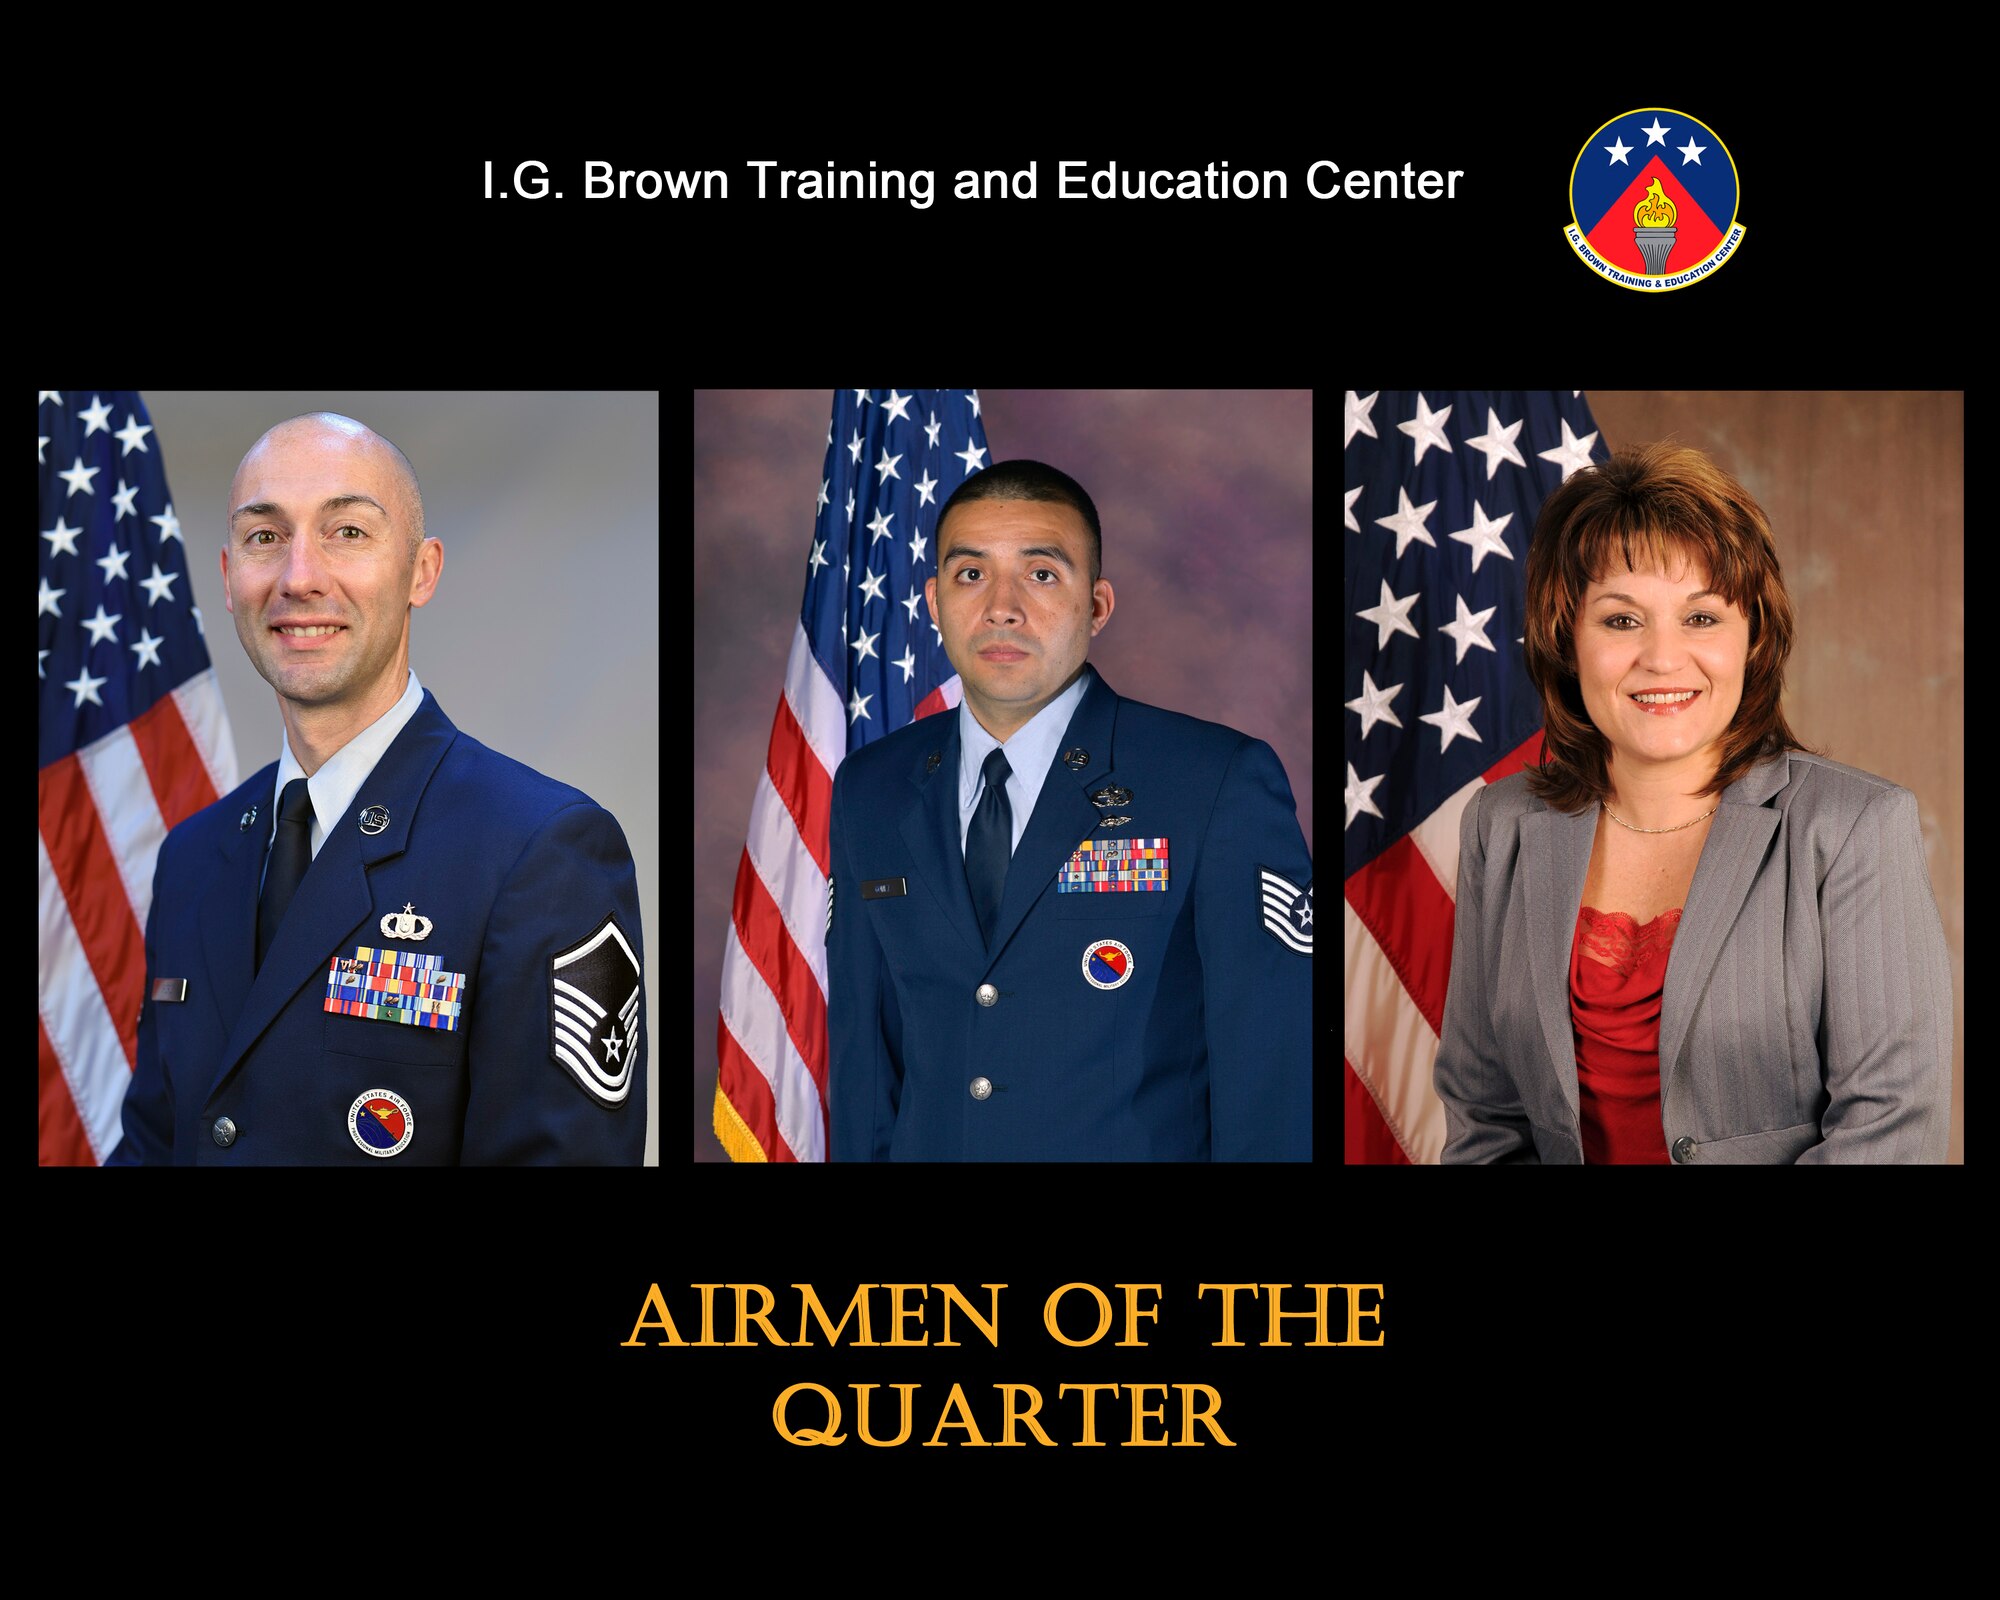 Master Sgt. Shane Hurd, Senior NCO of the quarter, Tech. Sgt. Angelo Gomez, NCO of the quarter, and Tammie Smeltzer, civillian of the quarter, were recognized for their outstanding service from July to September 2016, at the I.G. Brown Training and Education Center in Louisville, Tenn. (U.S. Air National Guard file artwork)